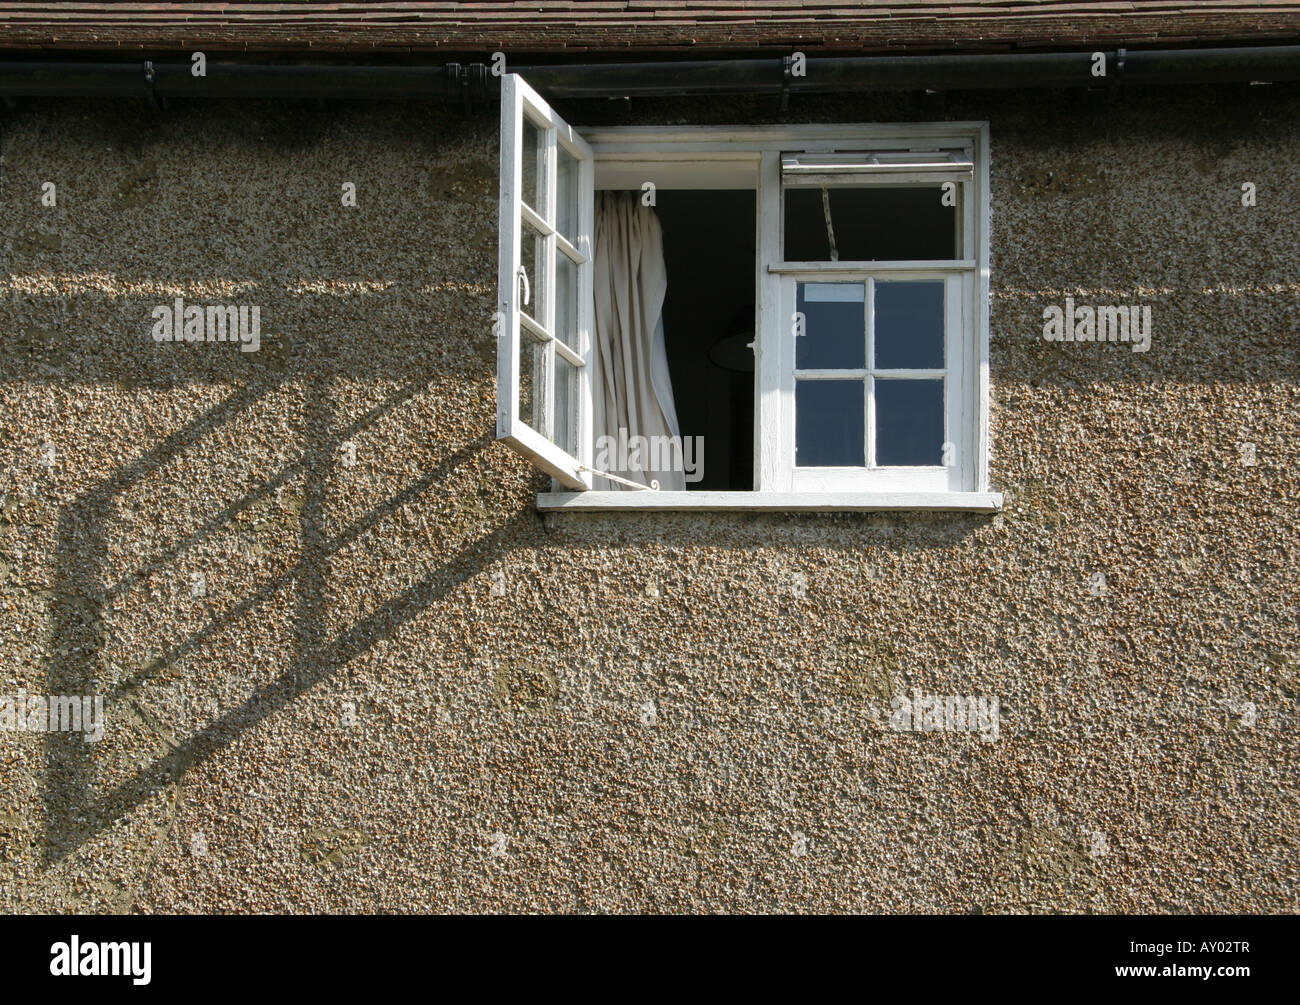 Open window of a house casting a strong geometric shadow across pebble dash wall Stock Photo